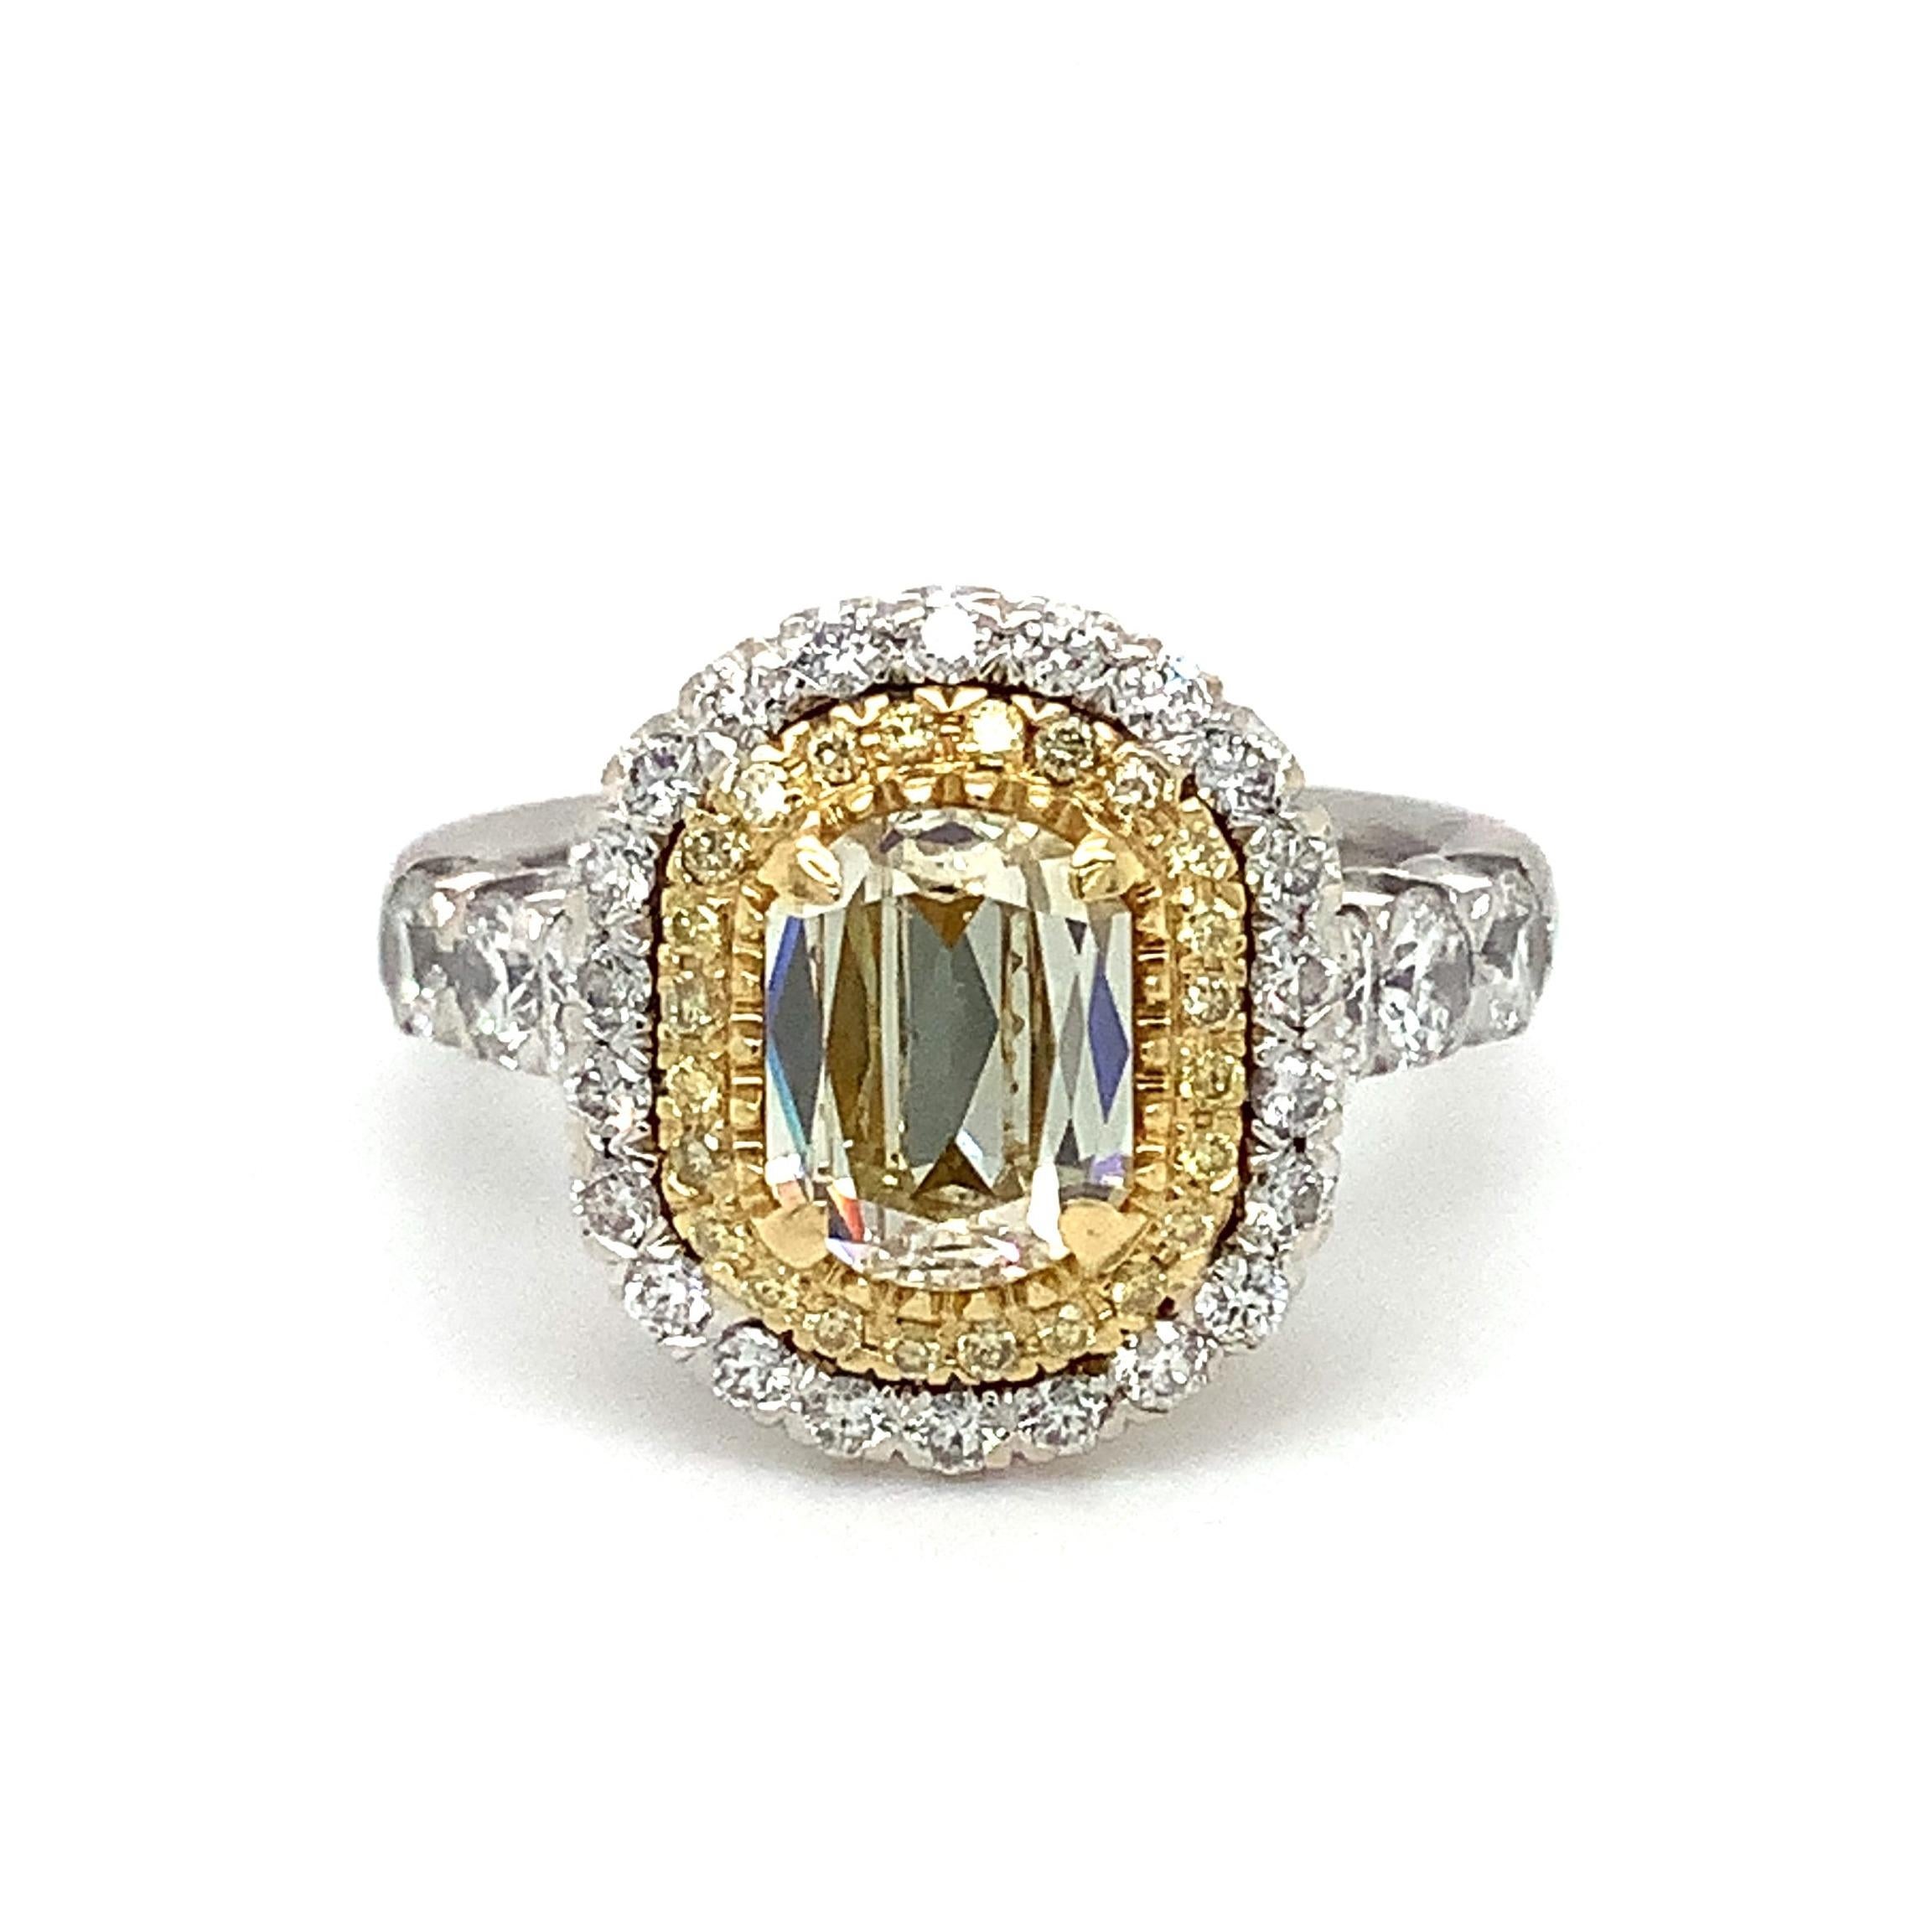  This Christopher Designs L'Amour Crisscut® Light Fancy Yellow Diamond Double Halo Ring is crafted from 18K white and yellow gold. The centerpiece is a 1.20 ct. VVS1 Clarity L'Amour Crisscut Oval Light Fancy Yellow Diamond. A total of 0.11 ct. tw.